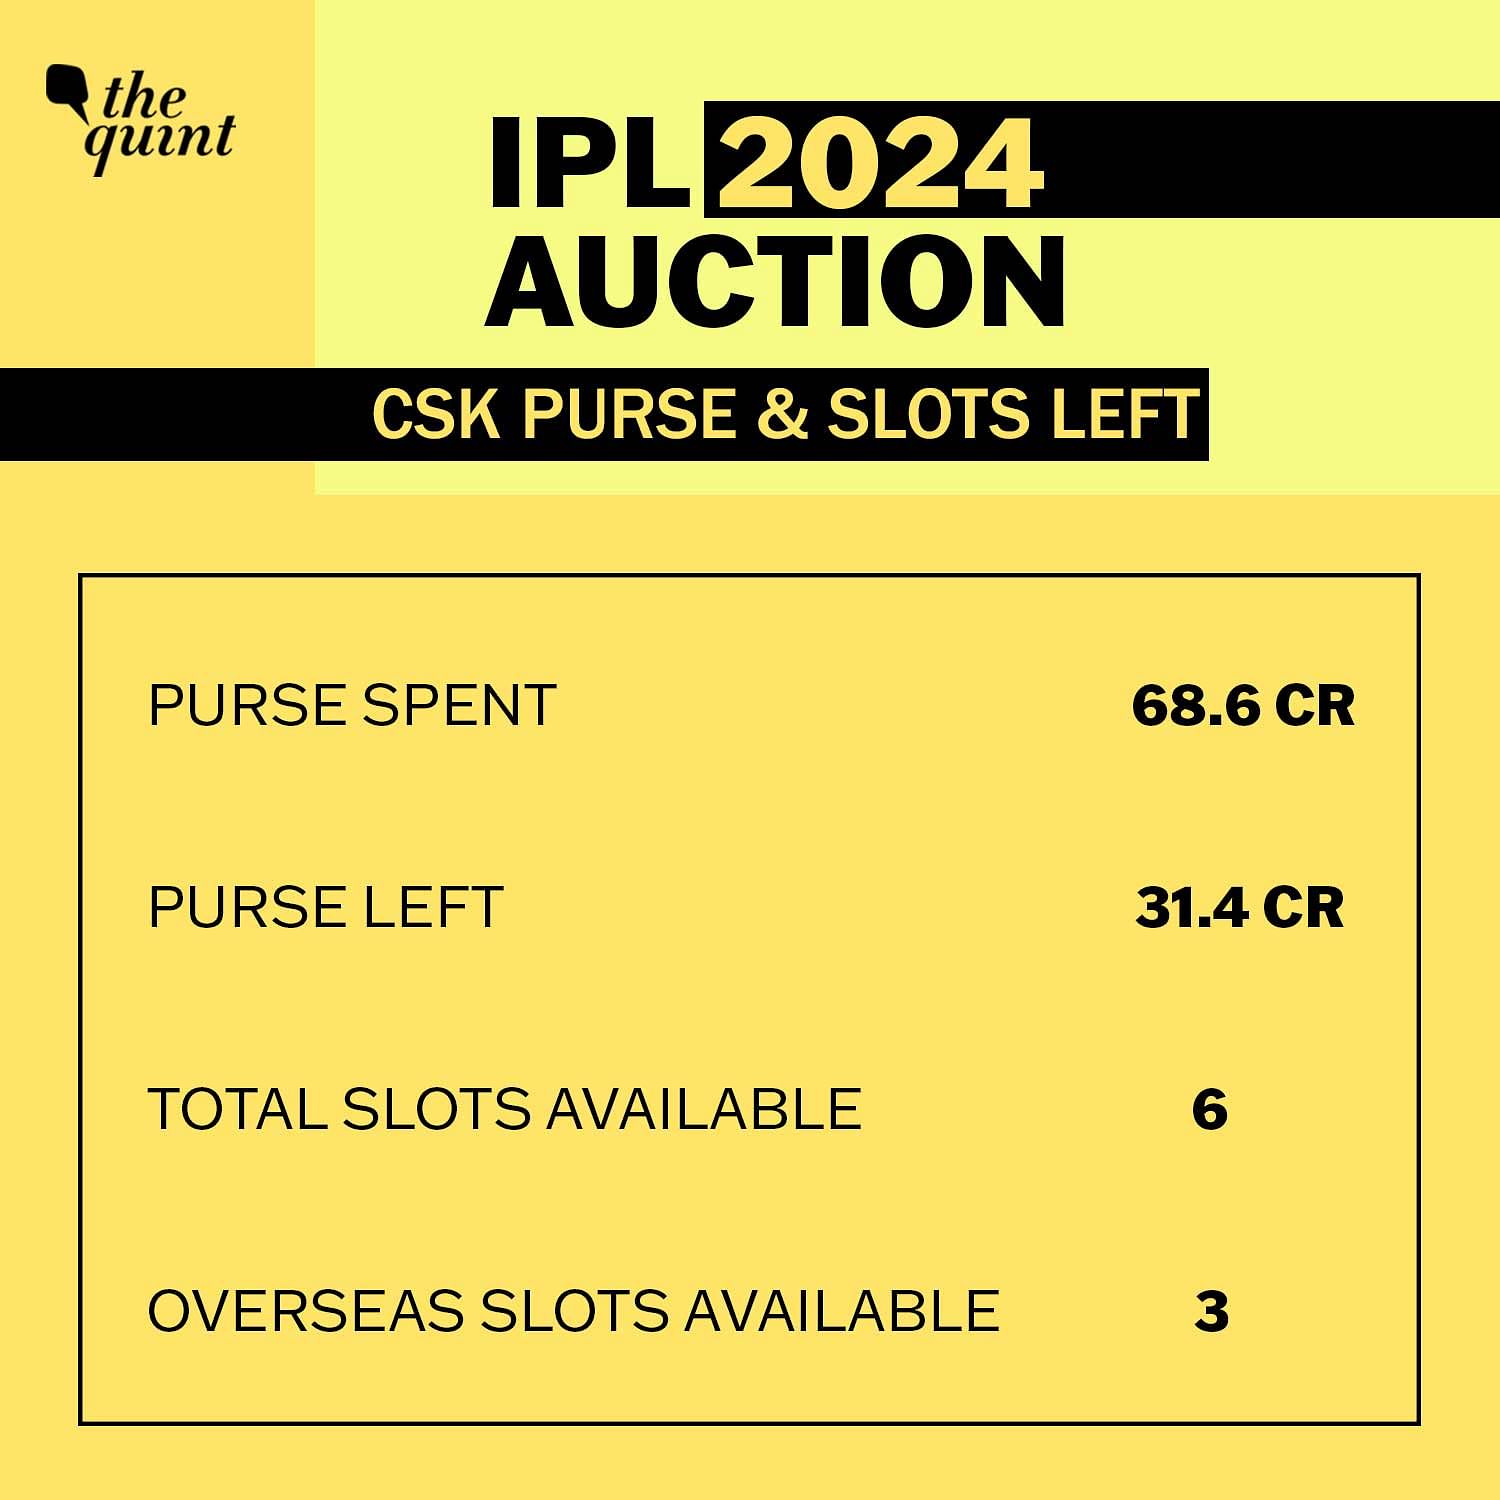 IPL 2024 Auction Rules and Regulations - Full Details